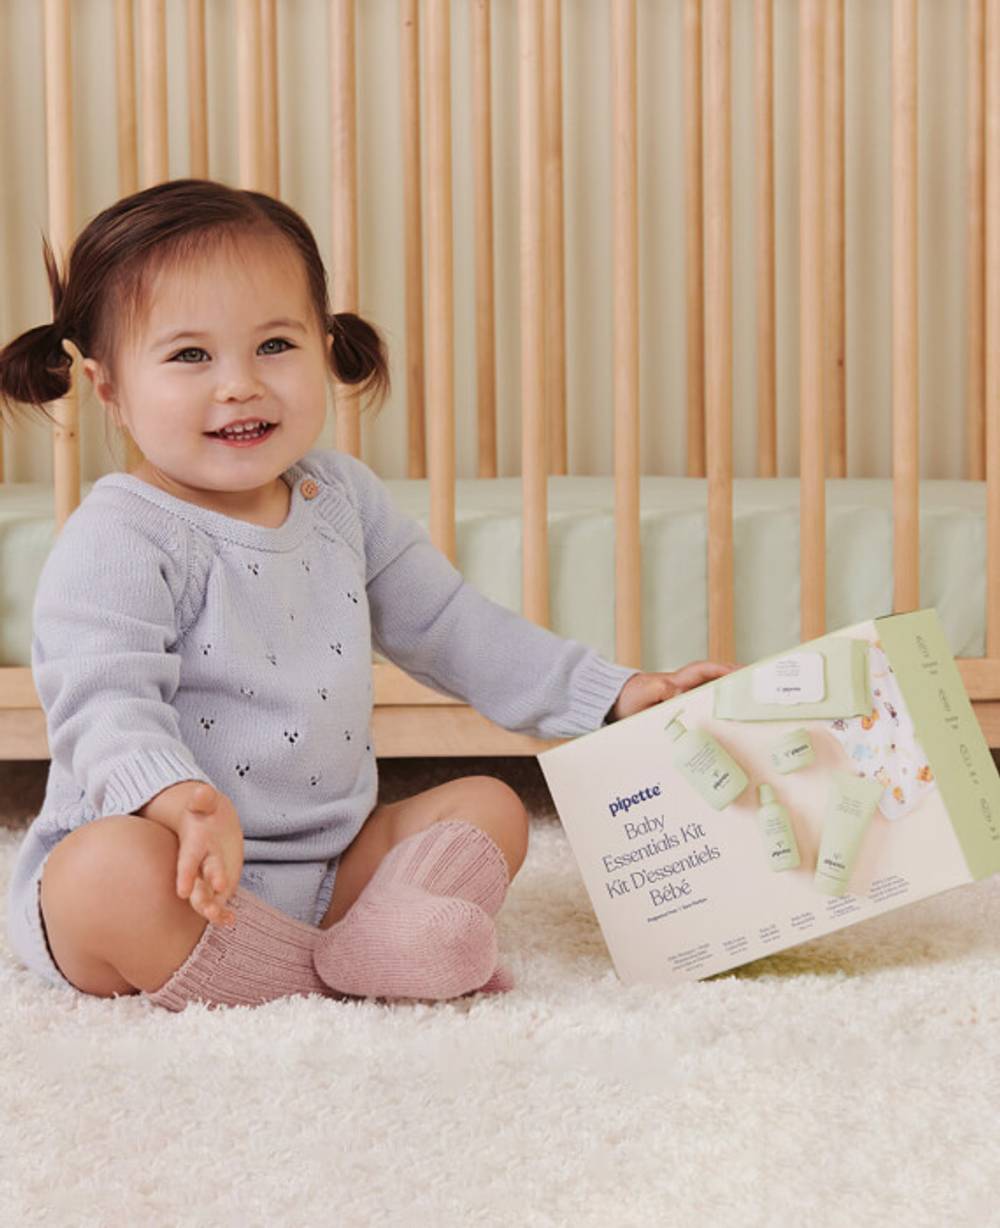 Baby playing with the Pipette Baby Essentials Kit which includes: Fragrance Free Baby Shampoo + Wash 11.8 fl oz, Baby Oil 4.5 fl oz, Fragrance Free Baby Lotion 5.7 fl oz, Baby Balm 2 oz, Baby Wipes 72 ct and a 100% cotton wash cloth.